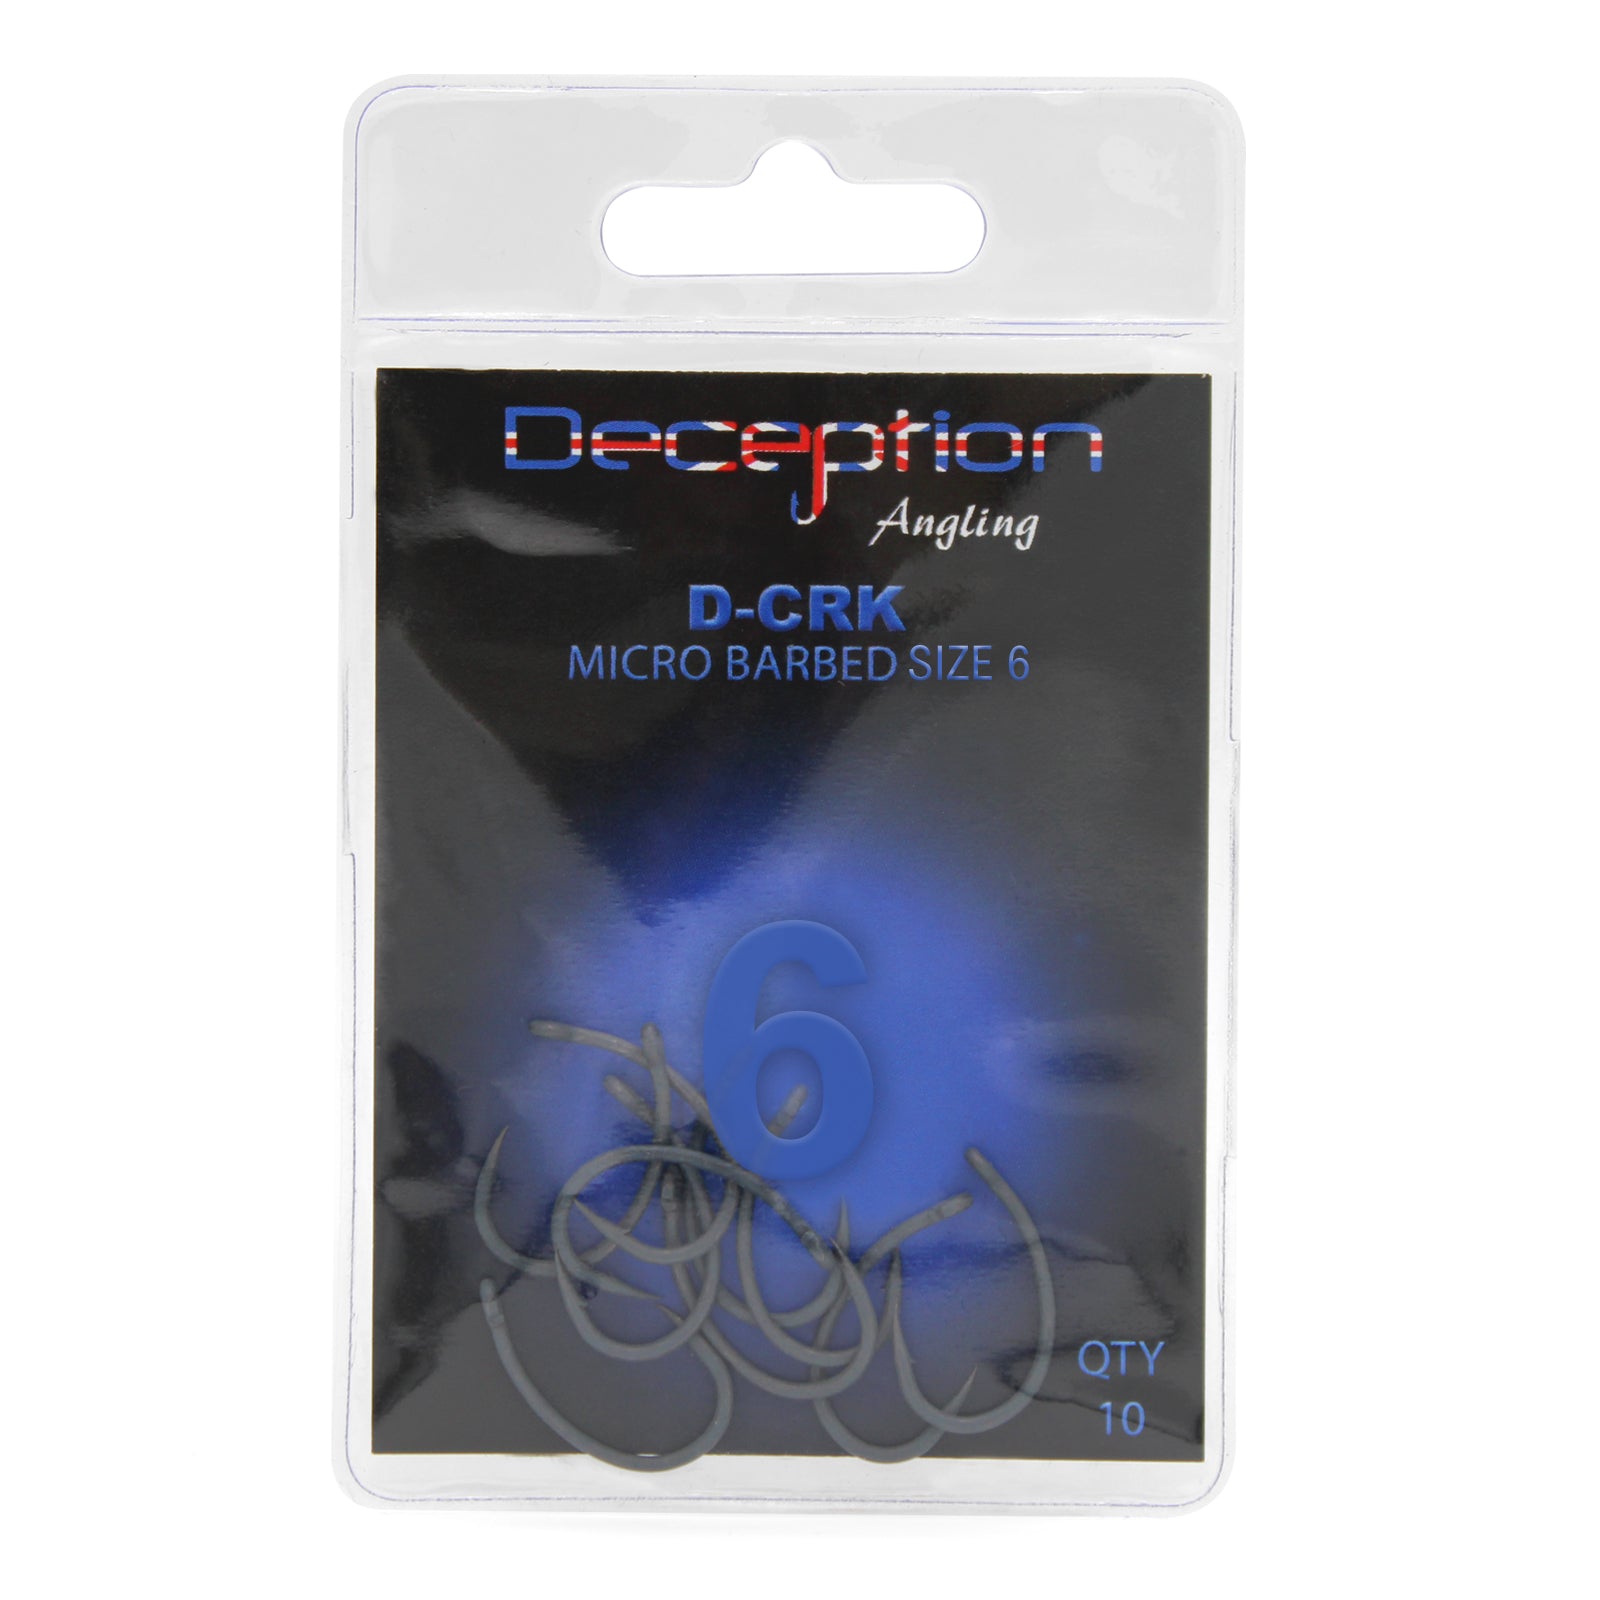 Deception Angling D-CRK Micro Barbed Fishing Hooks Pack of 10 Size 6